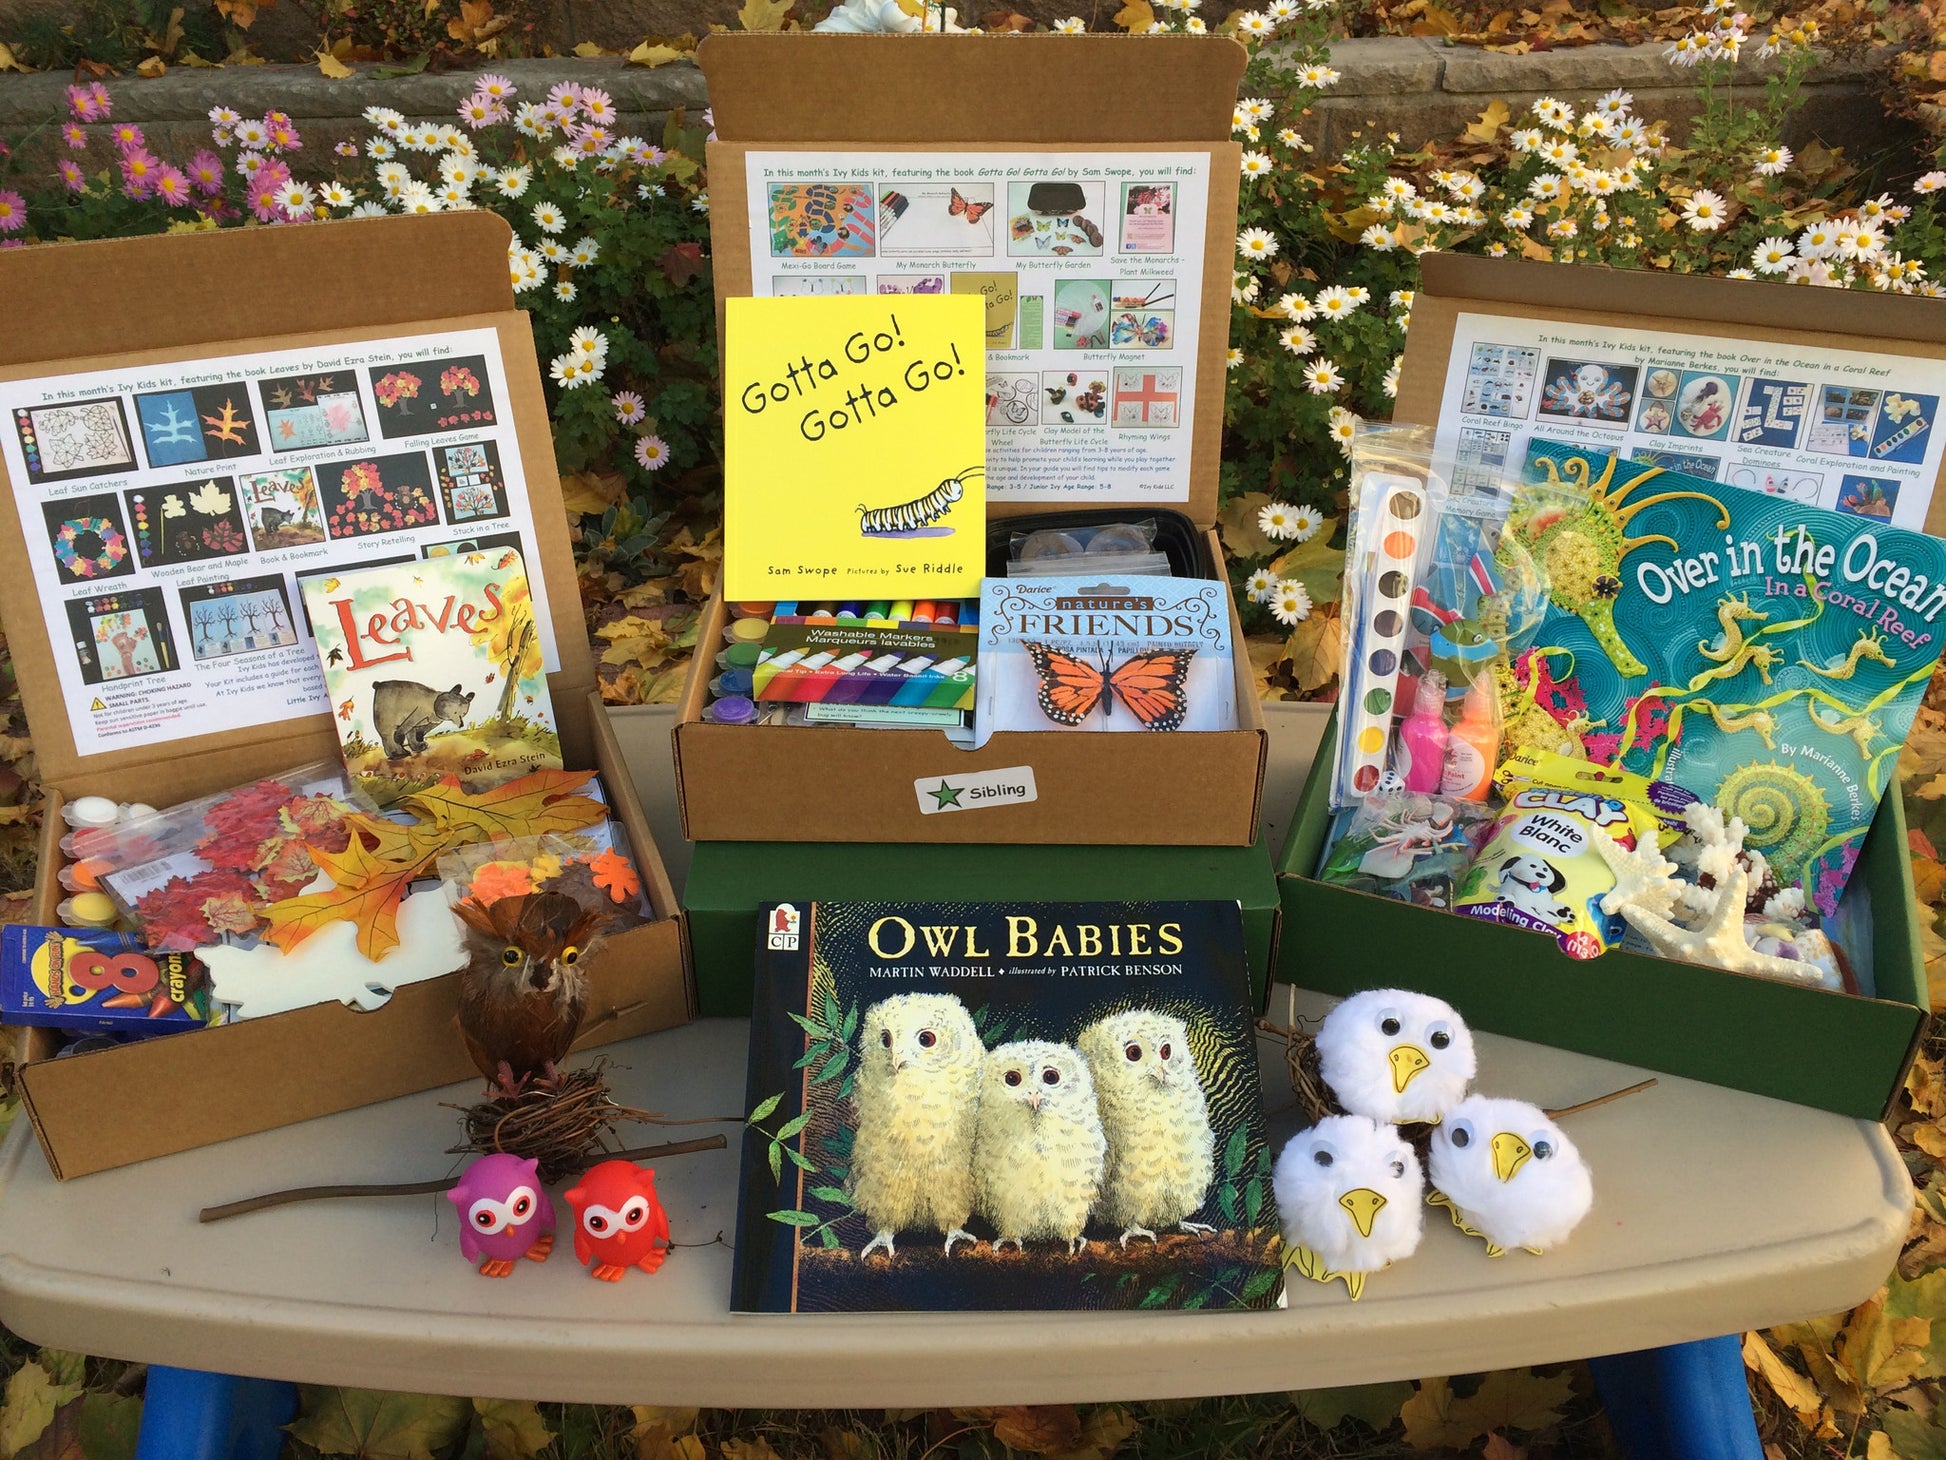 Children's subscription box with a book and over 10 STEAM activities inspired by the story